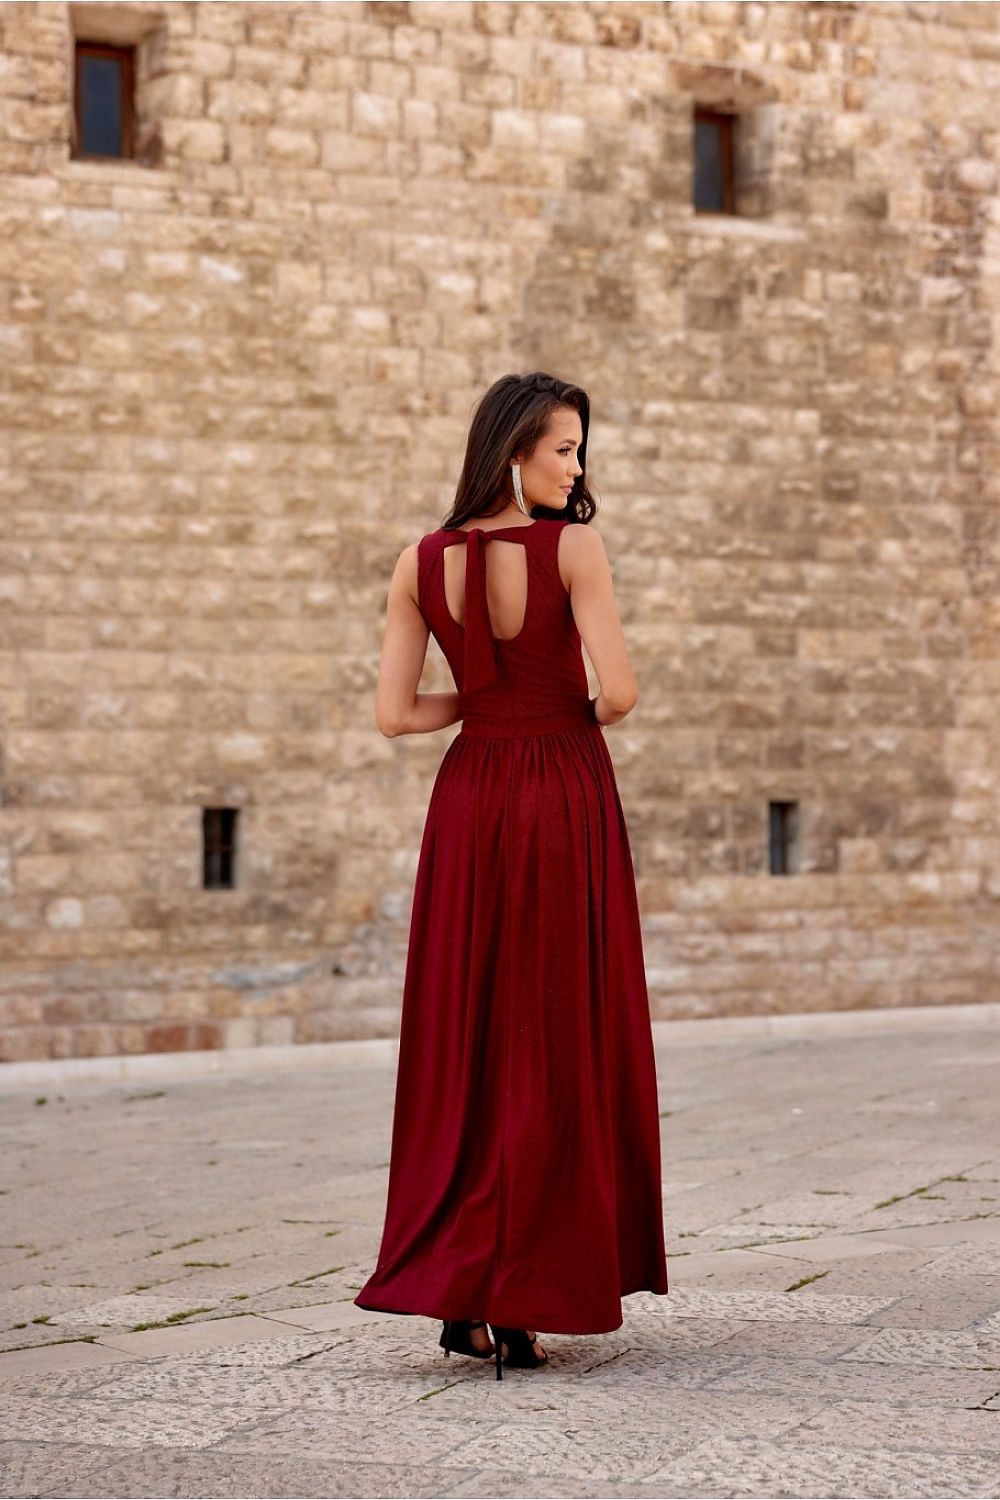 Brocade Long Maxi Dress With A Tie Red Sleeveless Evening Dresses